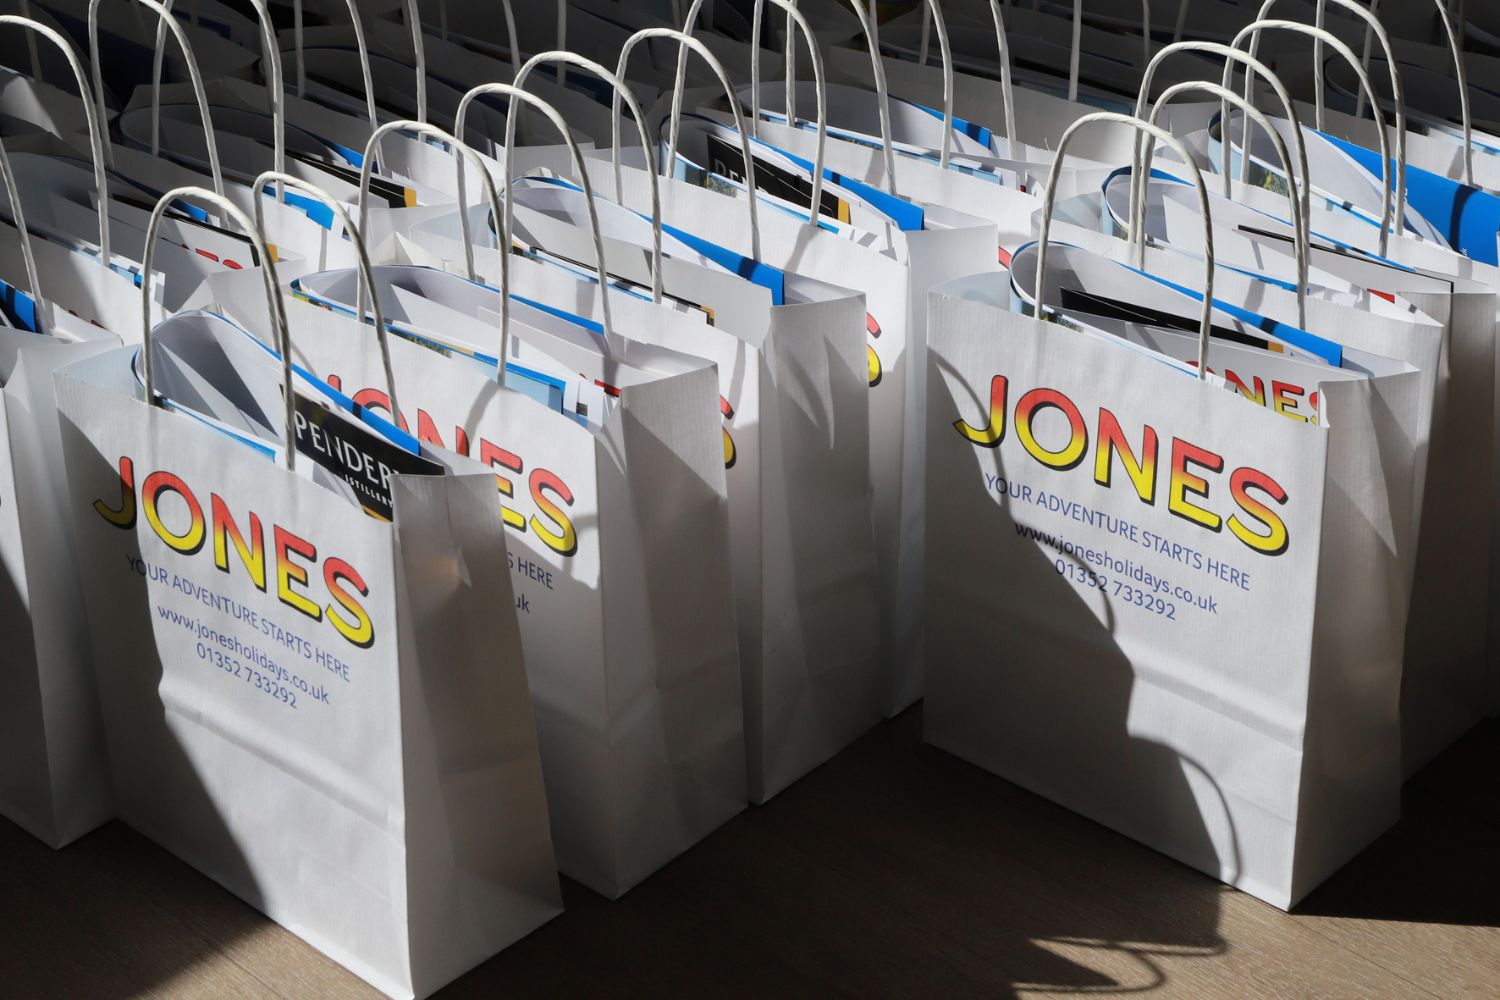 All packed up and ready to go, welcome packs for Jones Holidays’ next customers